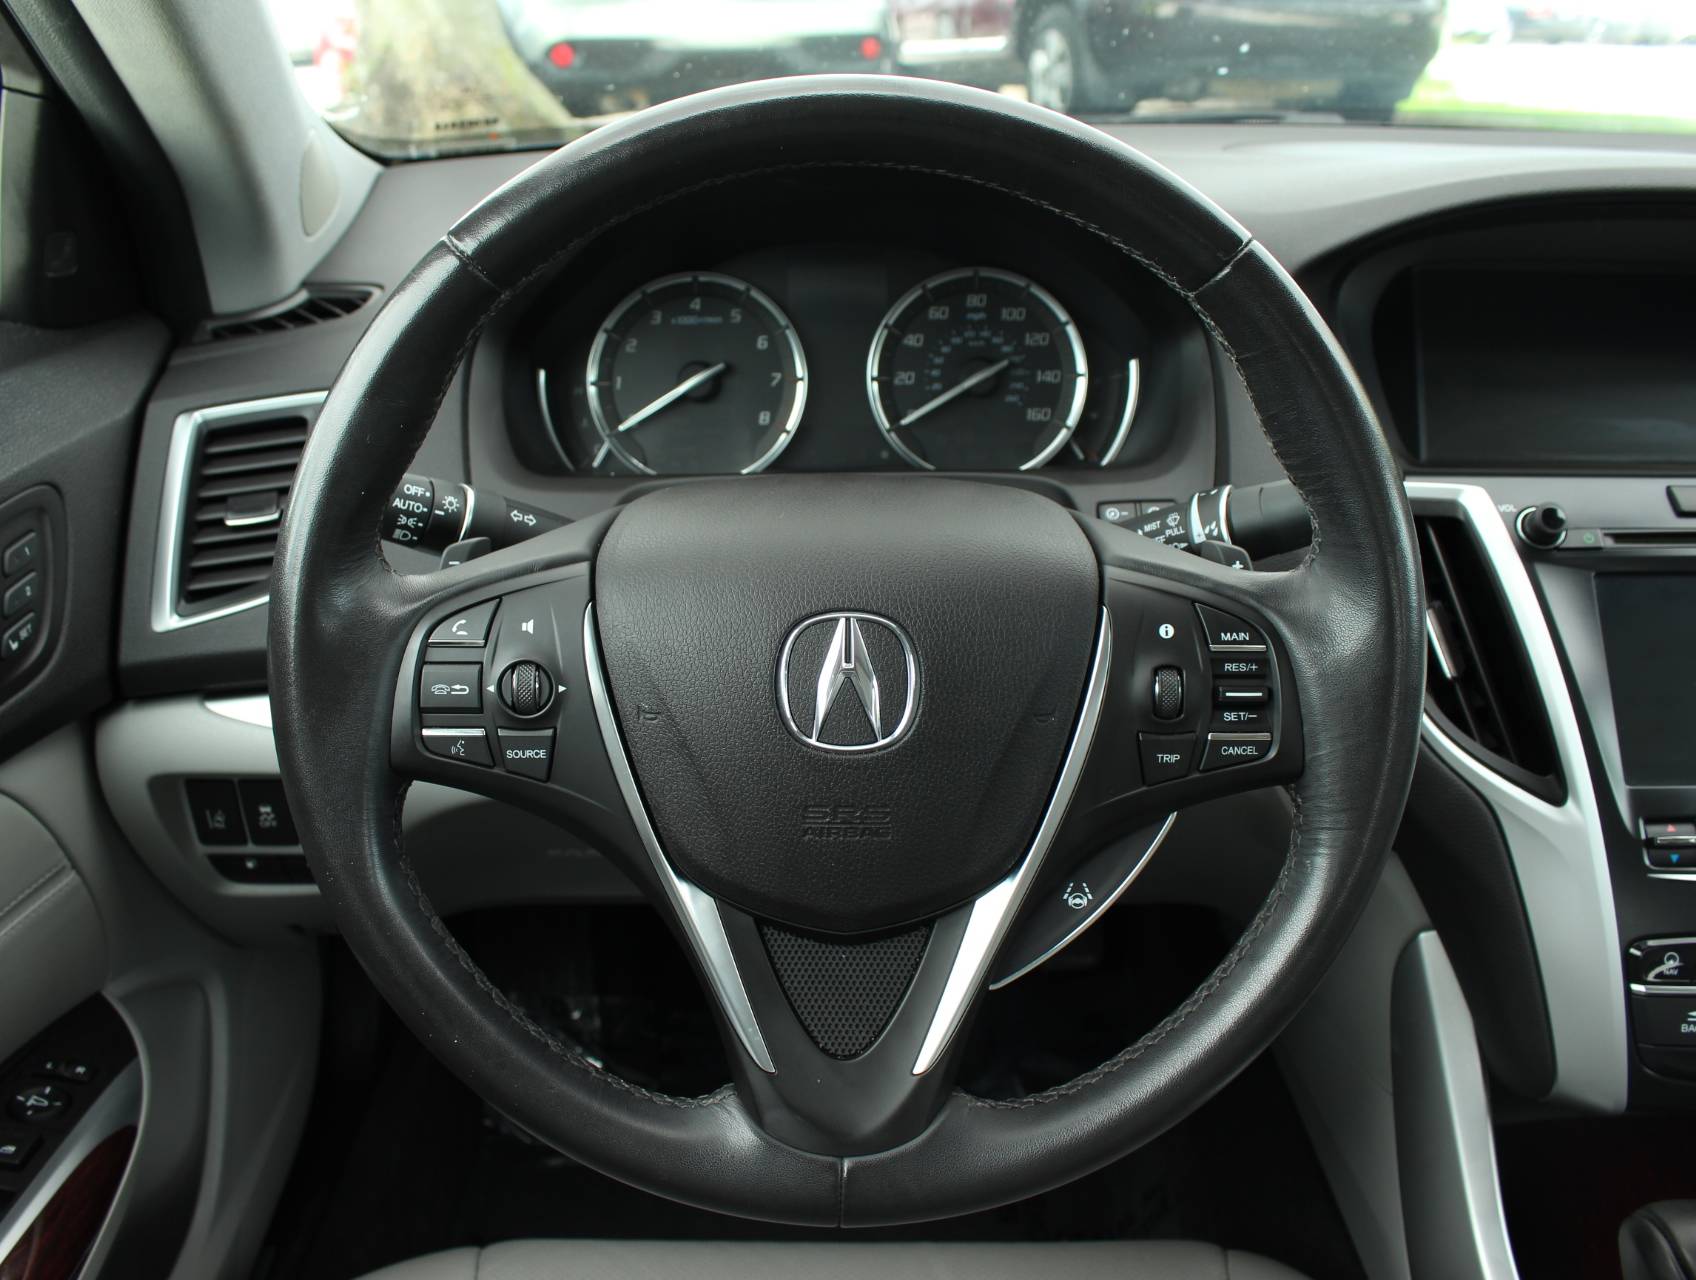 Florida Fine Cars - Used ACURA TLX 2015 MARGATE TECHNOLOGY PACKAGE